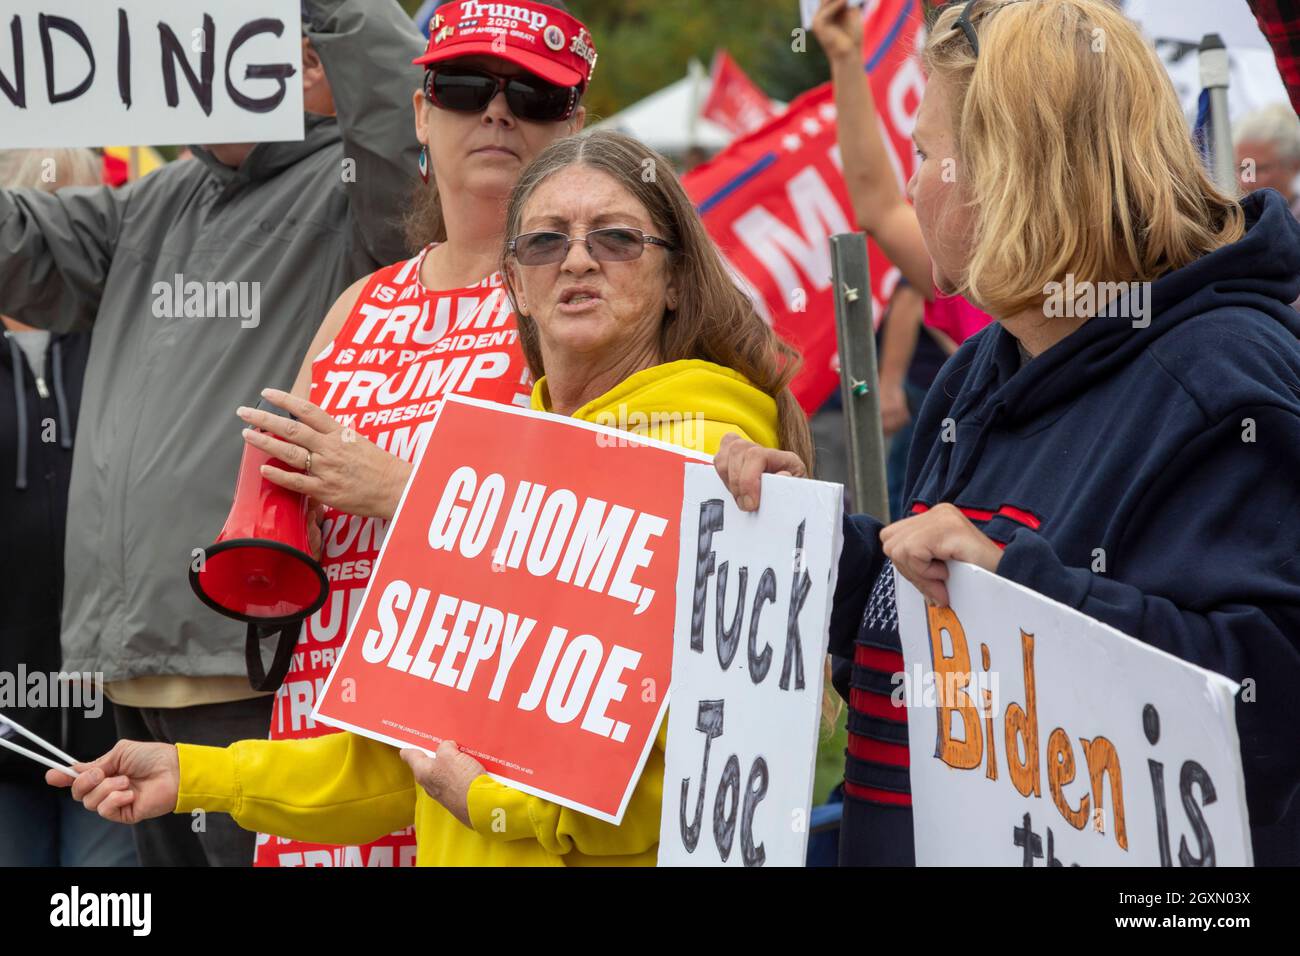 Howell, Michigan, USA. 5th Oct, 2021. Republicans protest as President Joe Biden visits Michigan to promote his Build Back Better Plan. Biden's plan includes money to fight climate change and to lift children out of proverty. The Livingston County Republic Party called its protest the 'Stop the Spending Rally.' Credit: Jim West/Alamy Live News Stock Photo